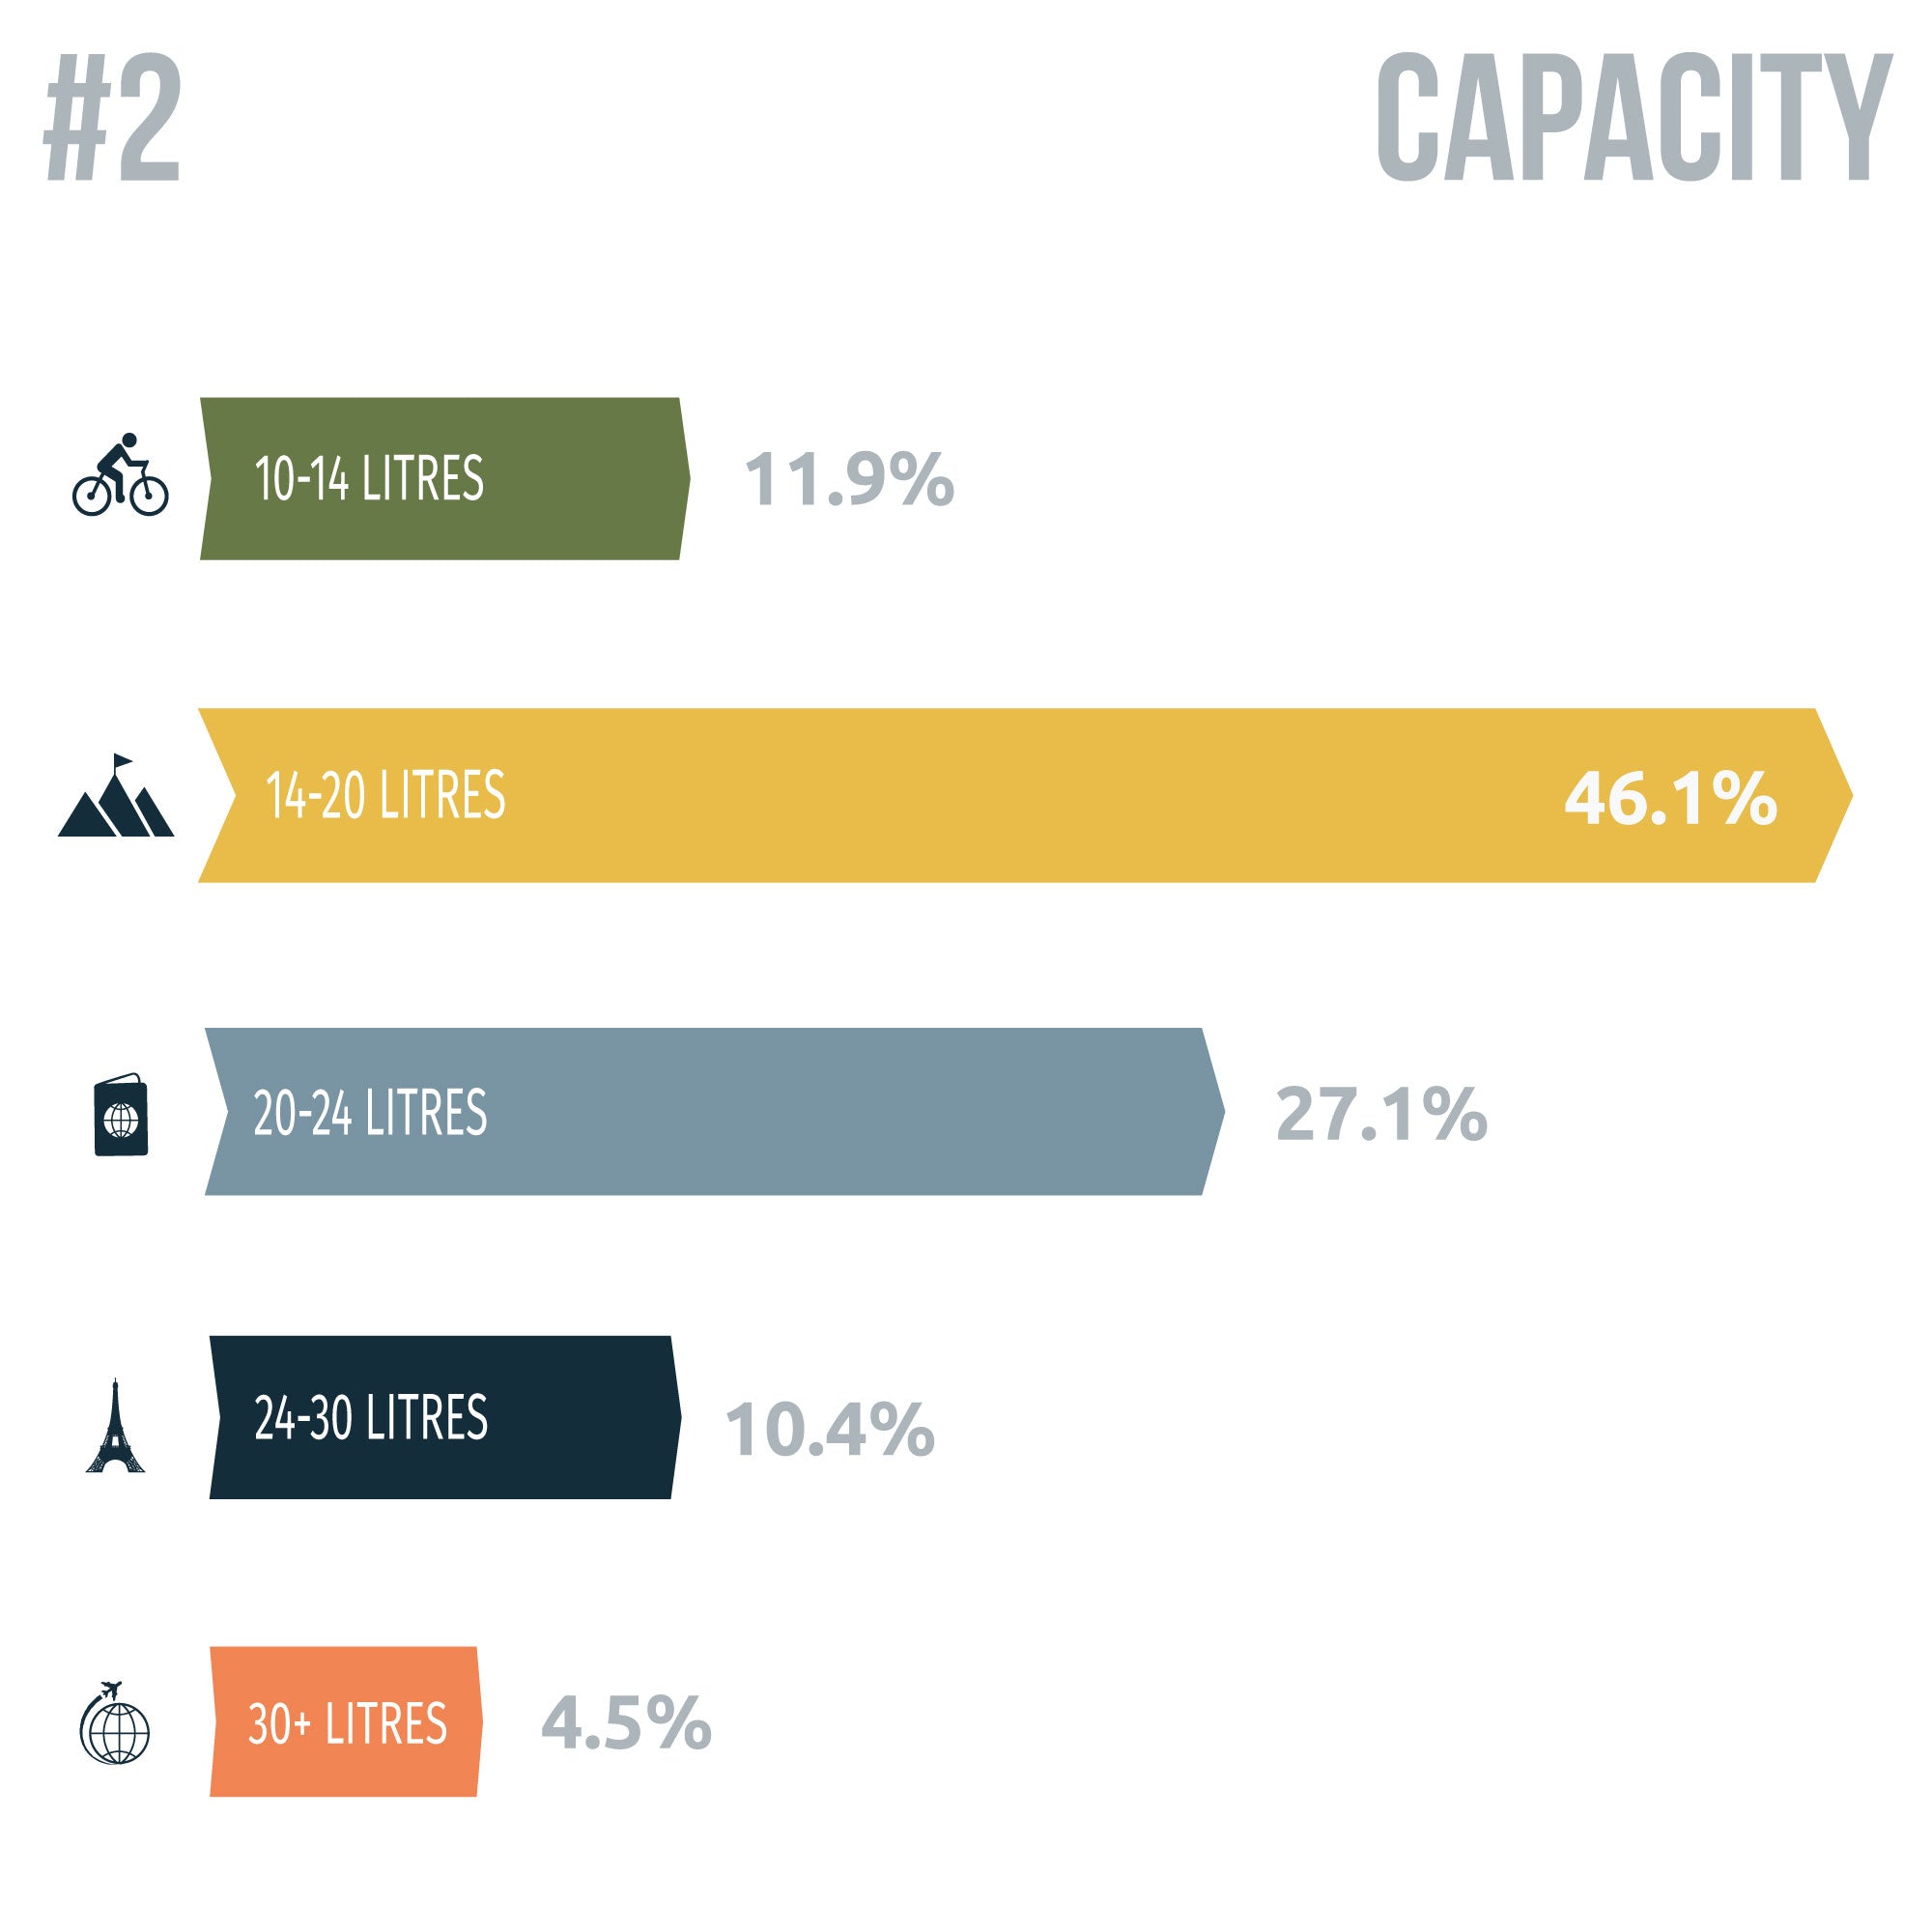 Infographic showing 14-20 litres to be the most popular capacity in a survey for the Wingback Backpack